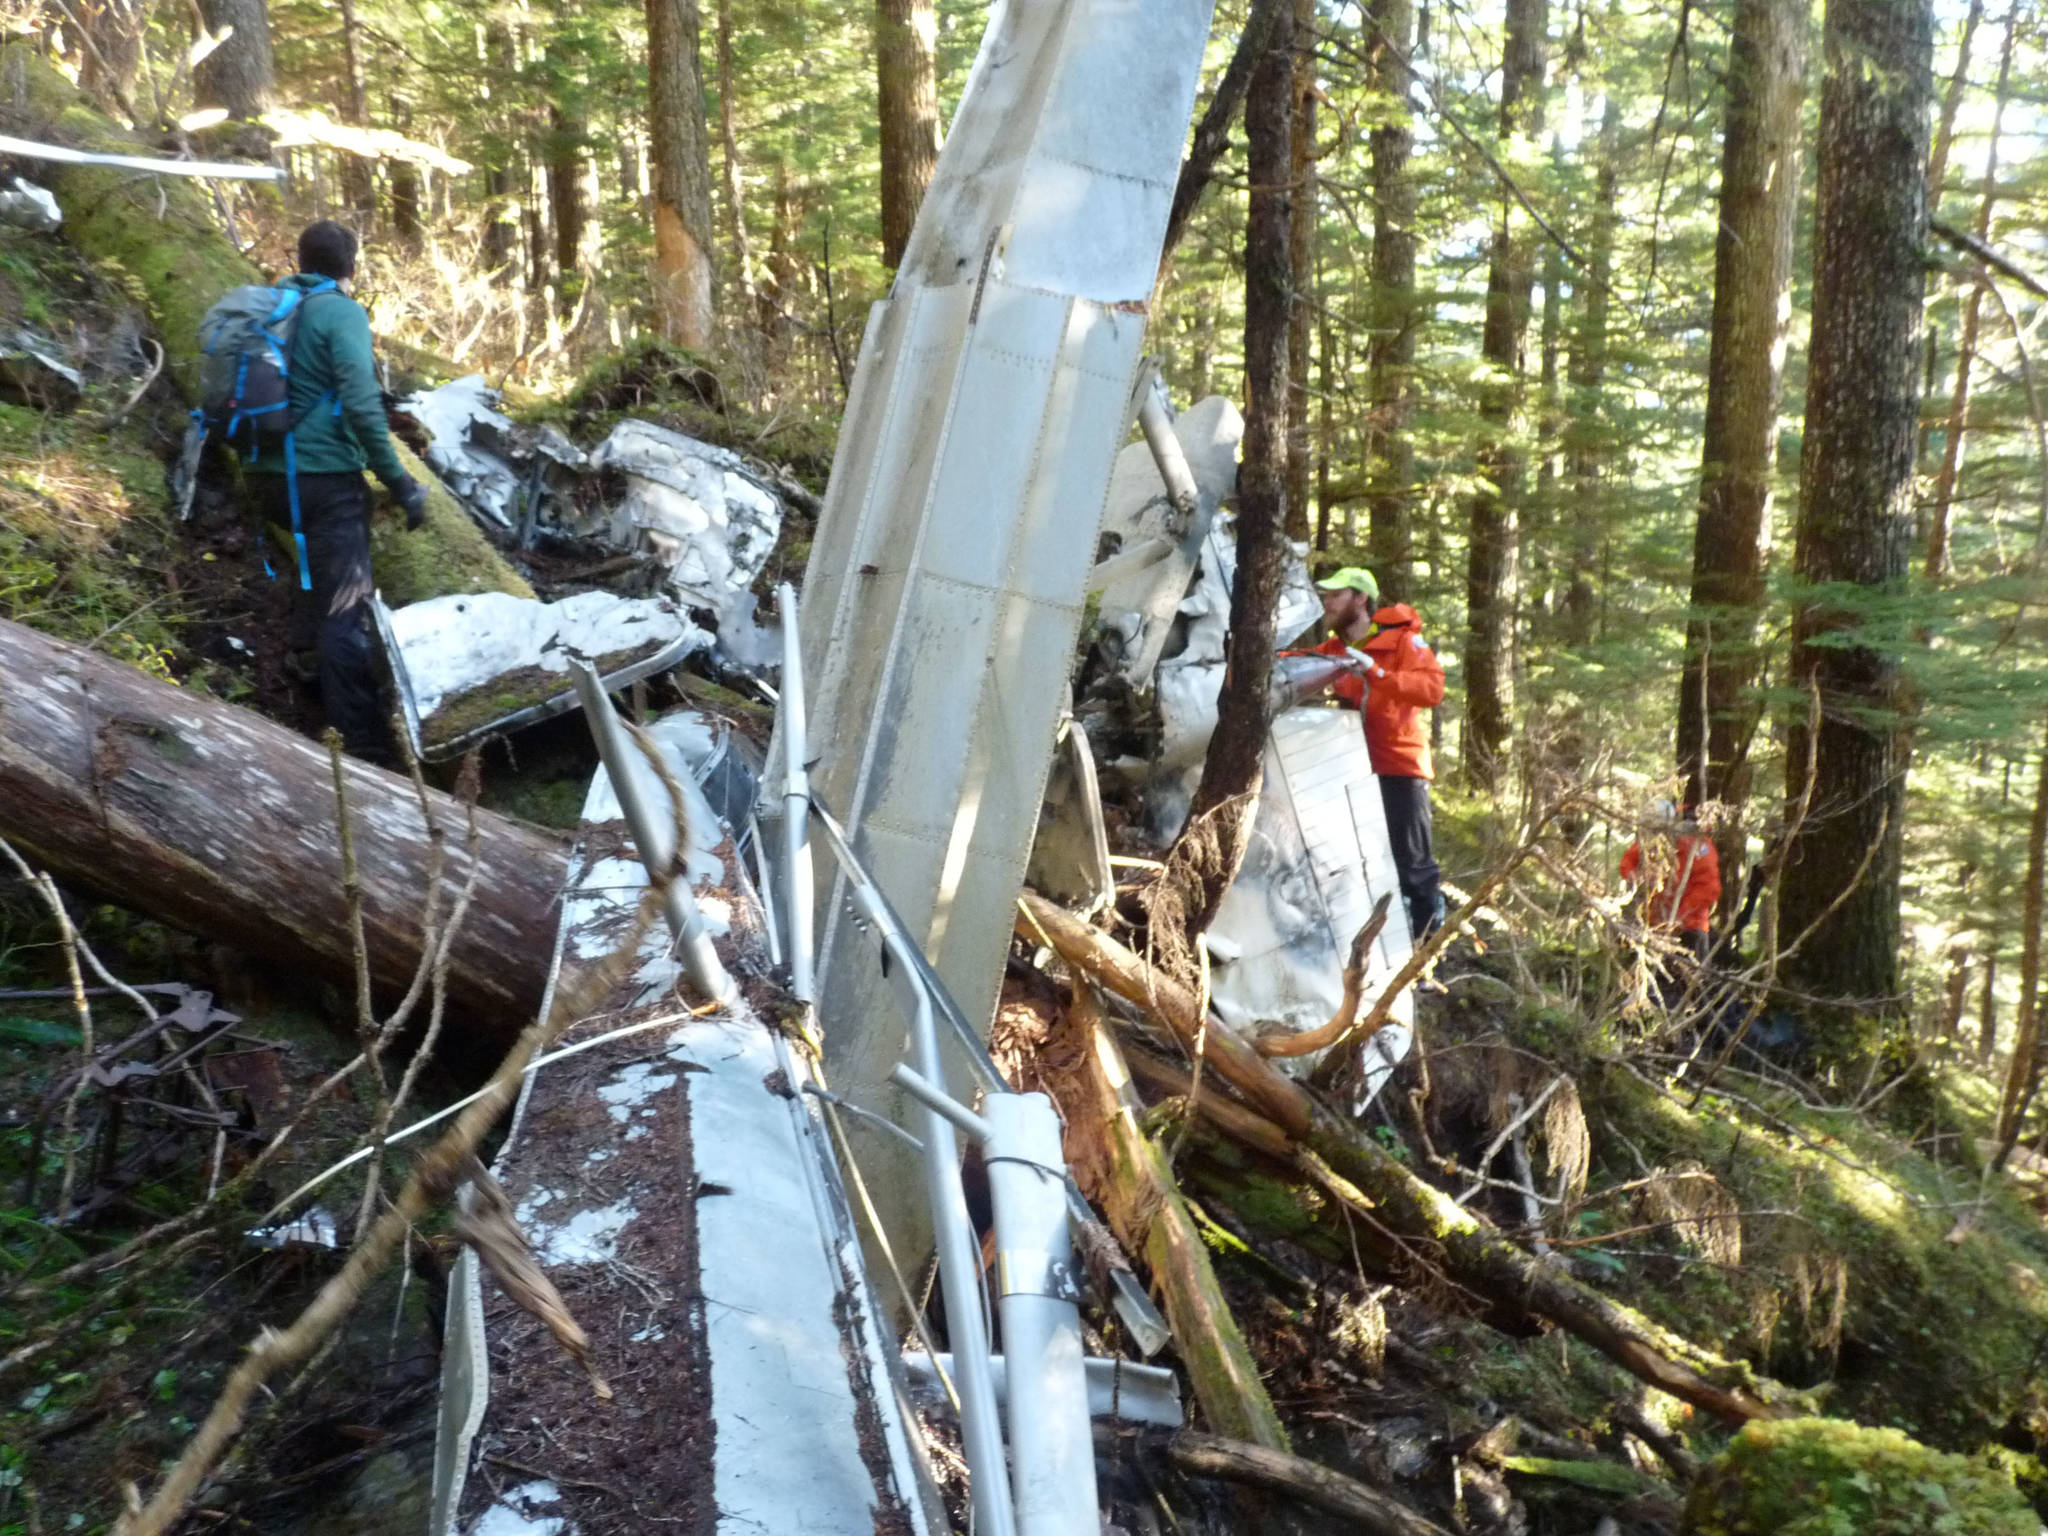 Investigators examine the wreckage of a Cessna 182 airplane that went missing just south of Juneau in 2008. The plane remained missing until this past Wednesday, when a hunter found it. (Photo courtesy of Alaska State Troopers)